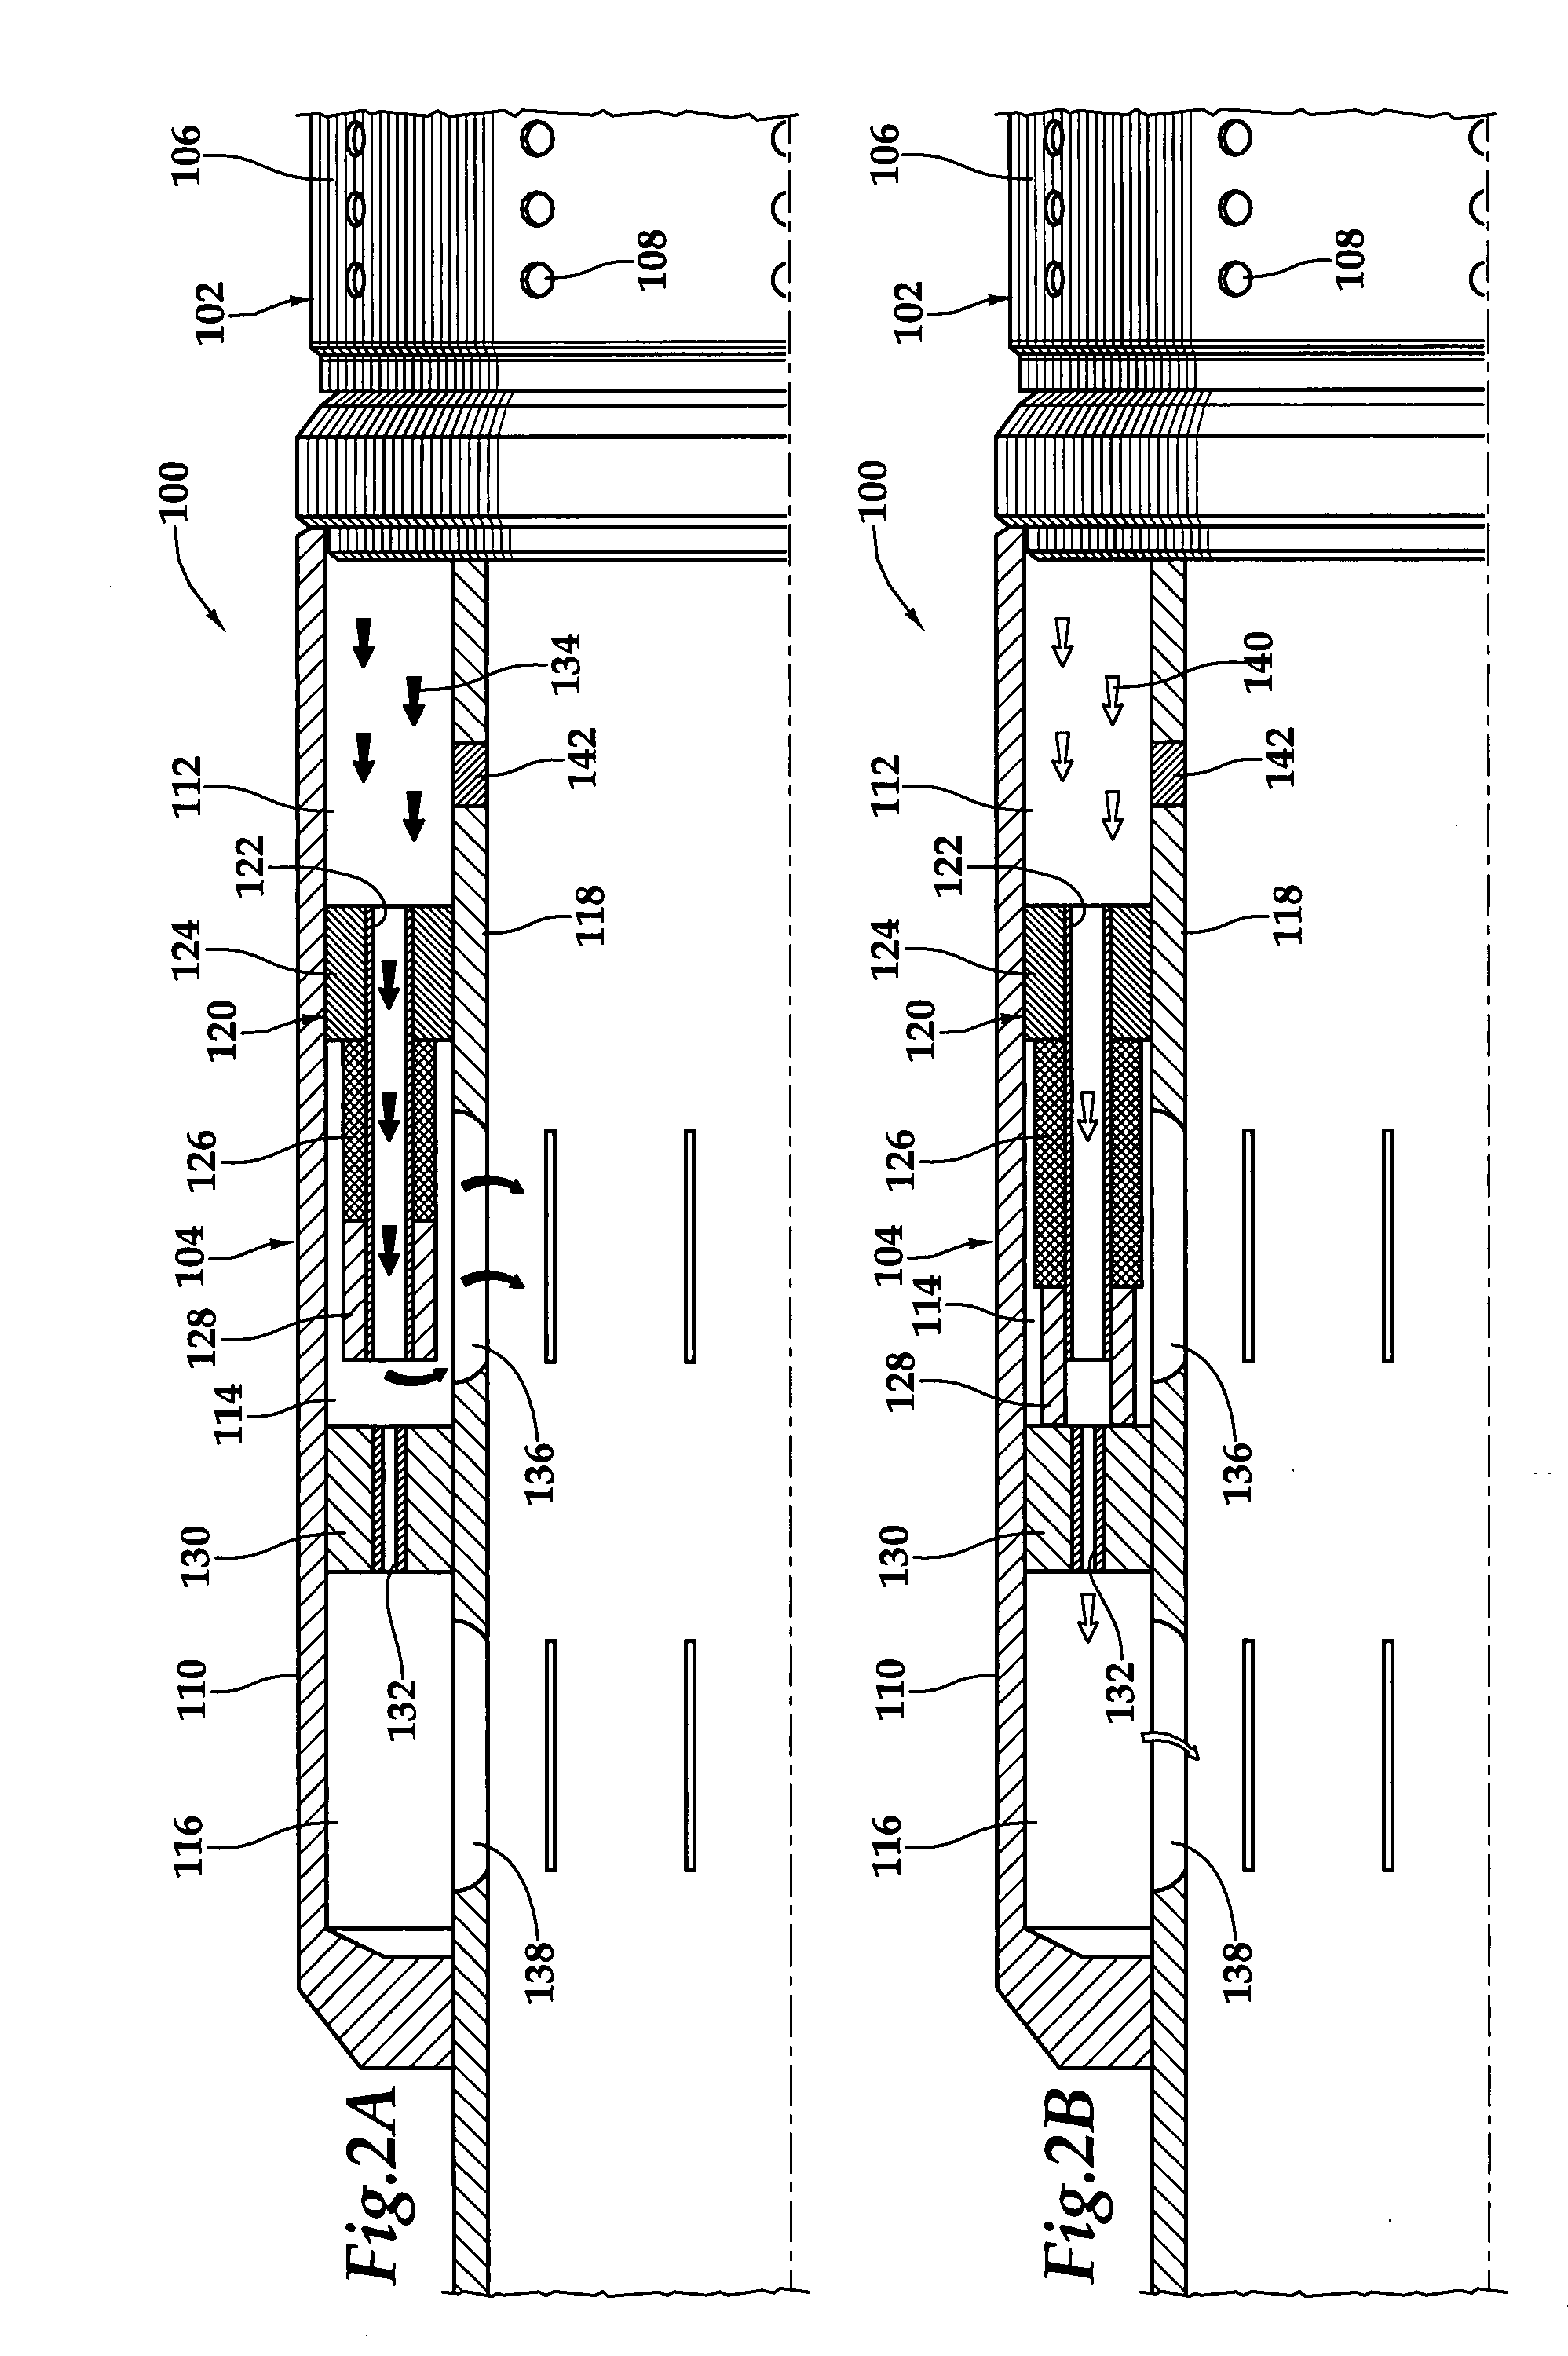 Apparatus for autonomously controlling the inflow of production fluids from a subterranean well